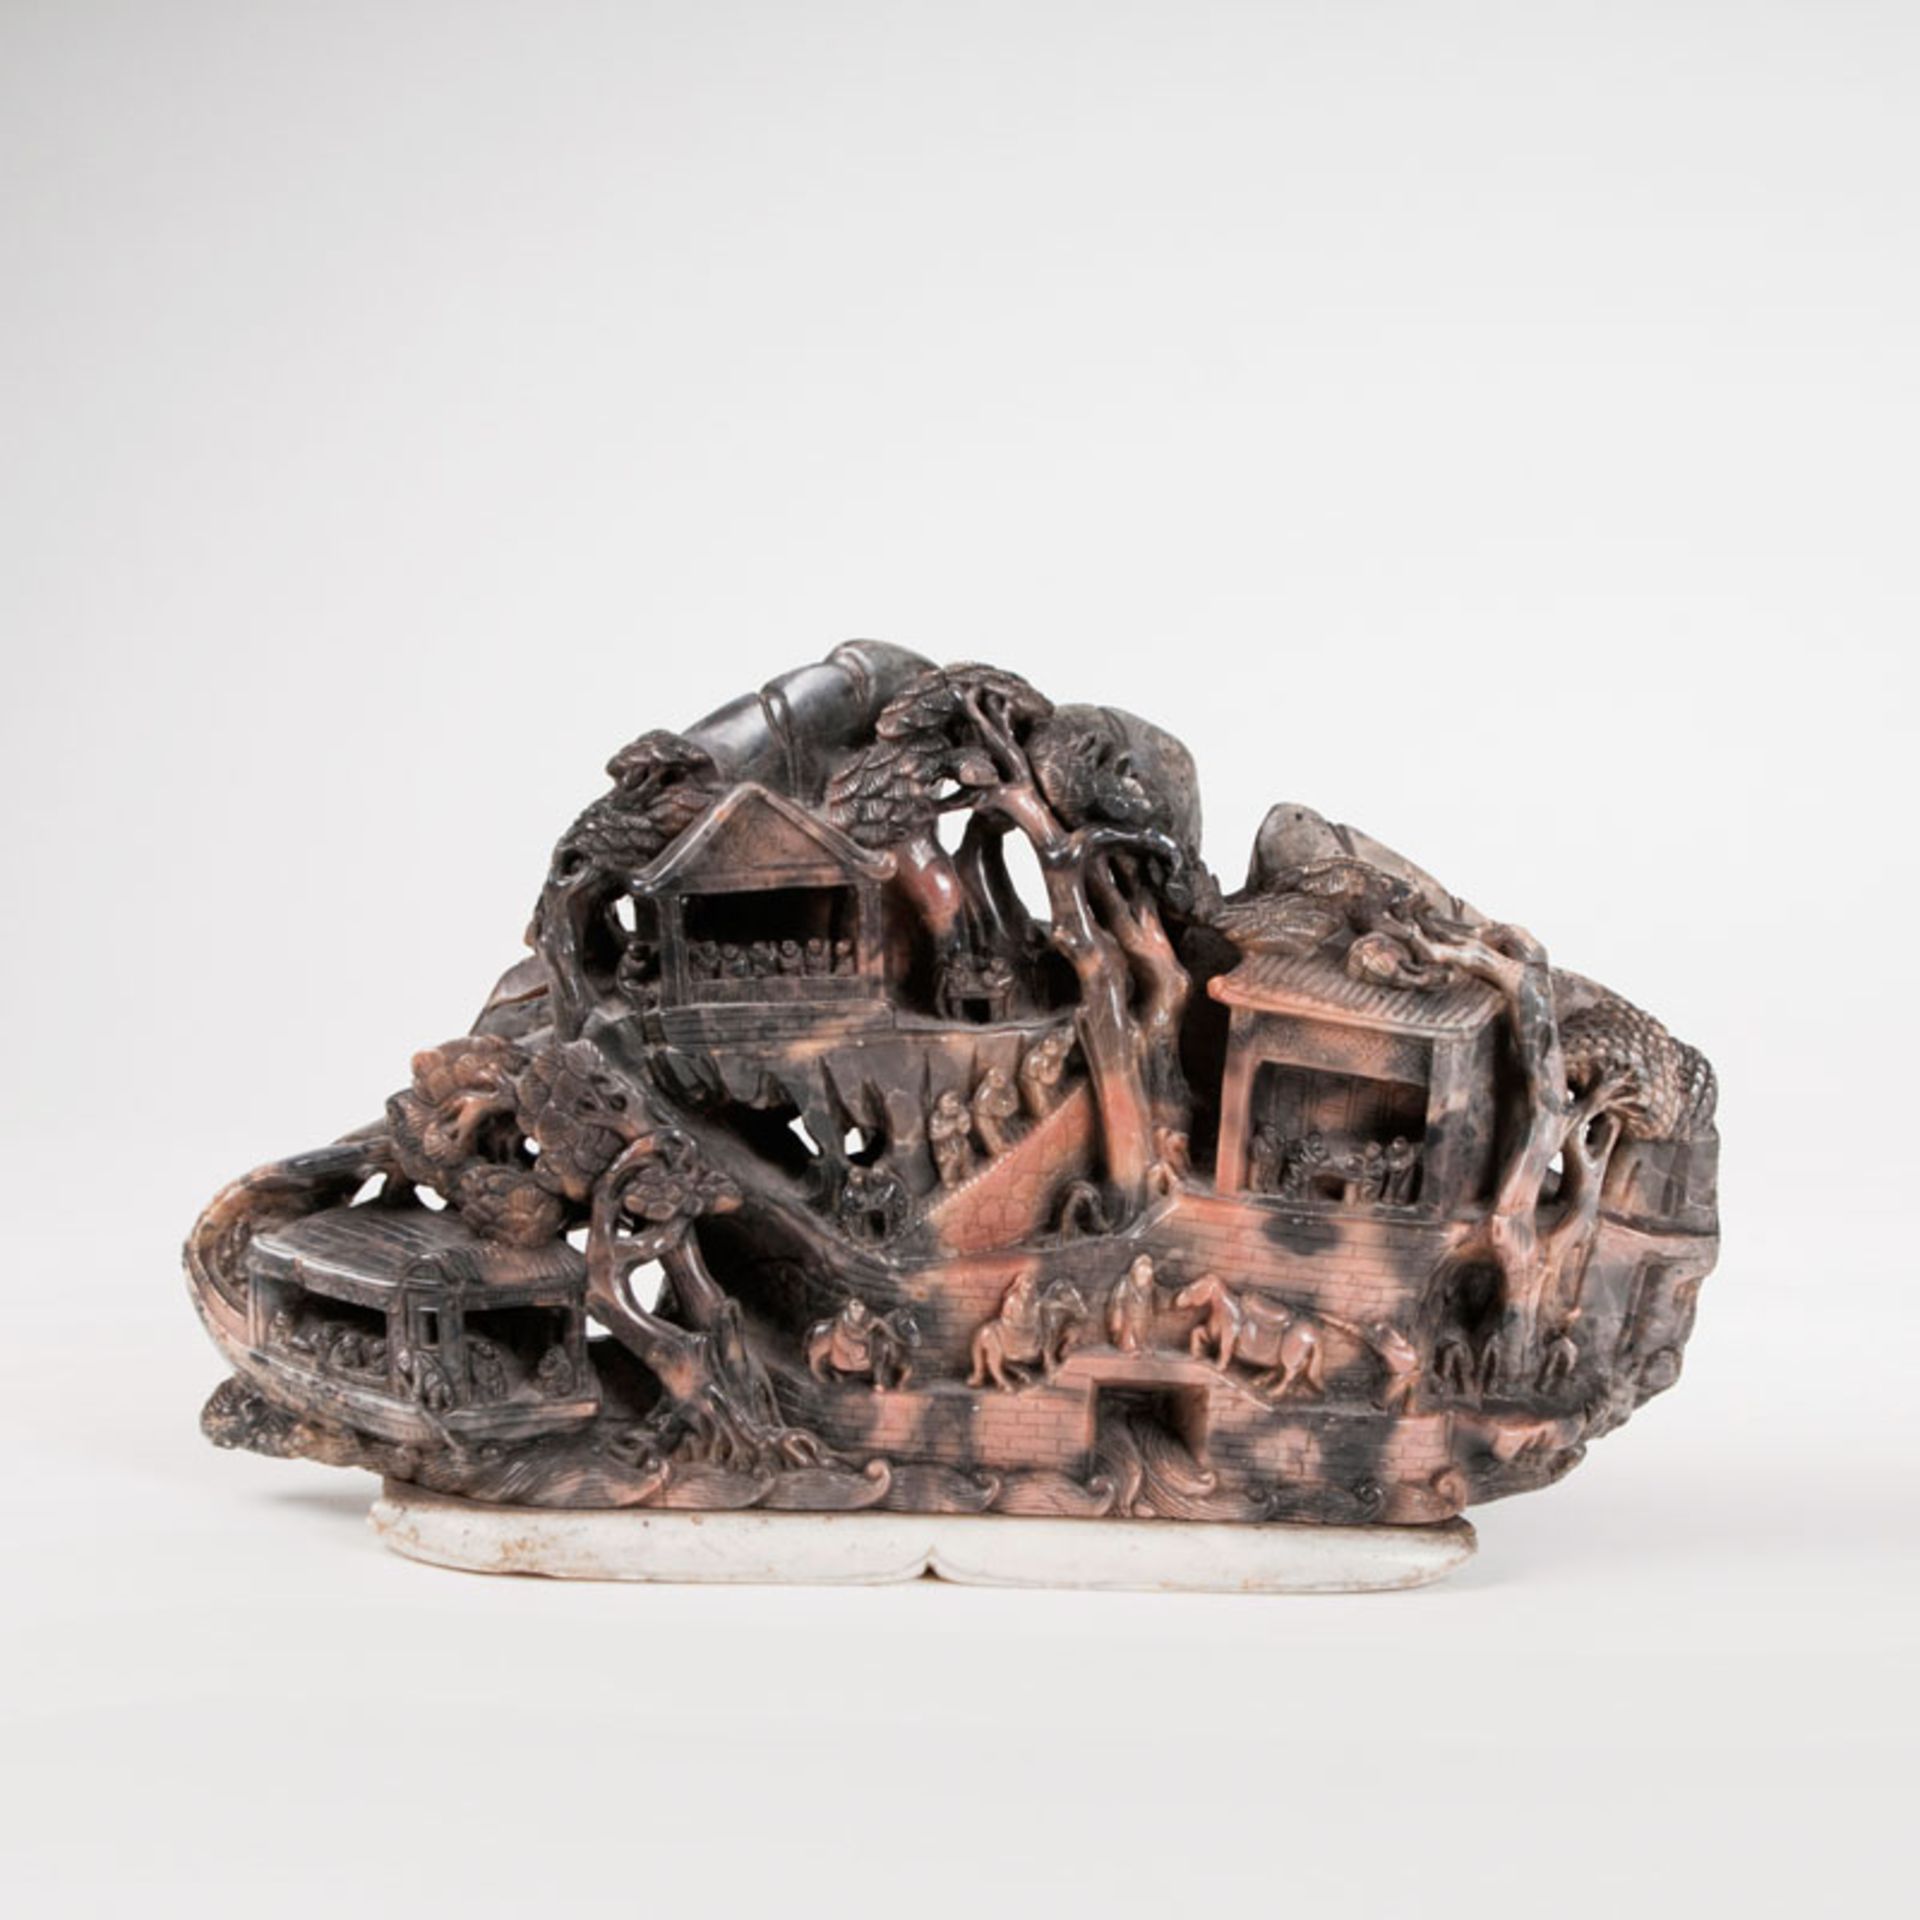 A soapstone carving depicting a mountainscape along the river with figures China, late Qing-